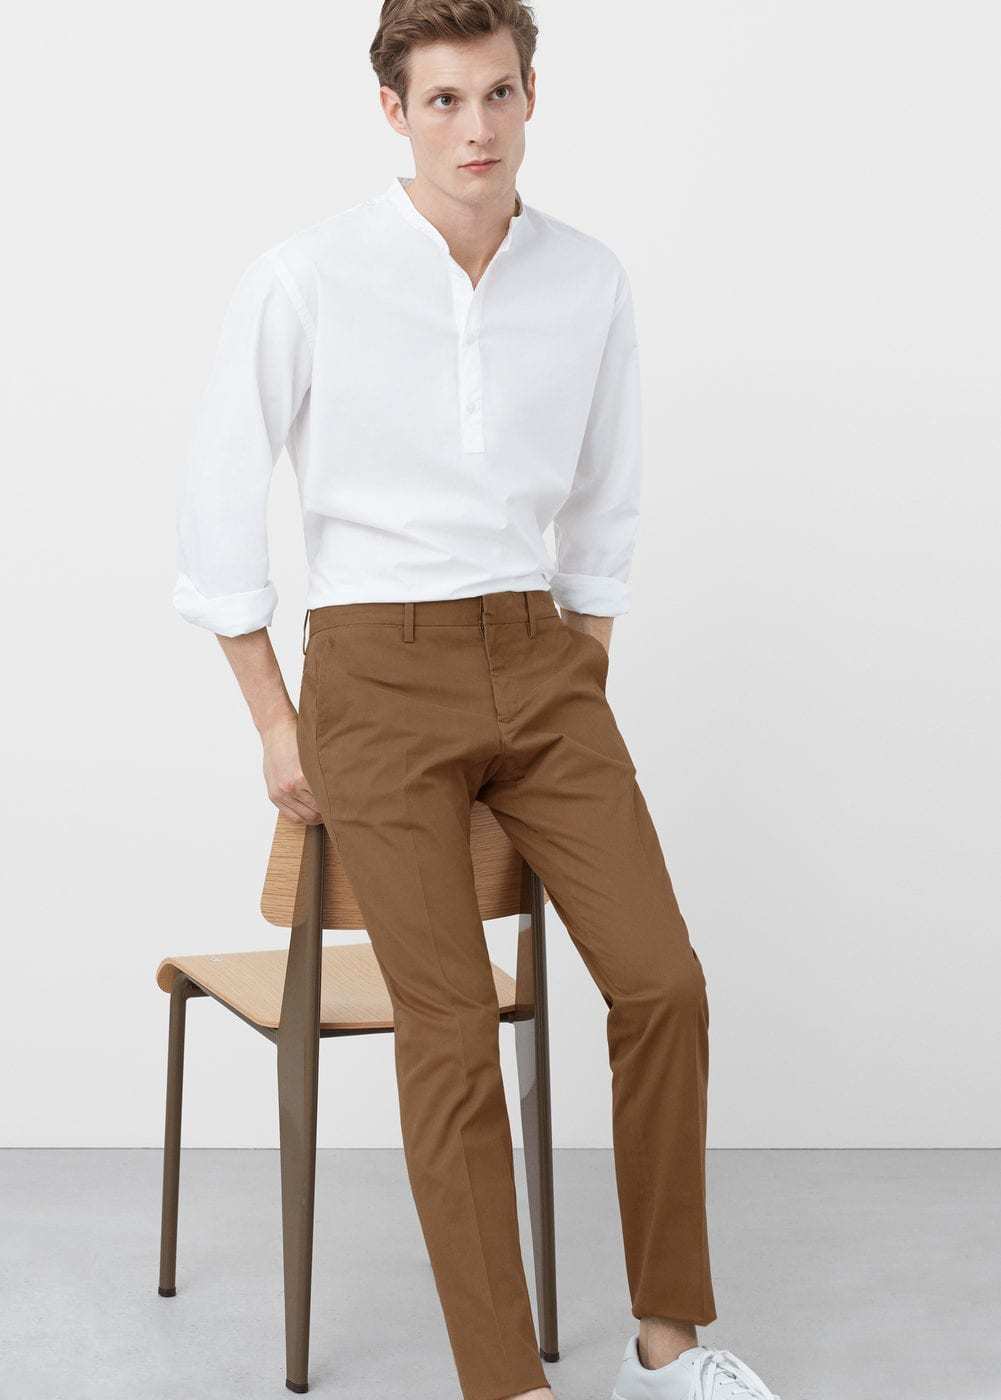 Chino pants | White shoes | mens outfit | Roupas masculinas, Roupas,  Masculino